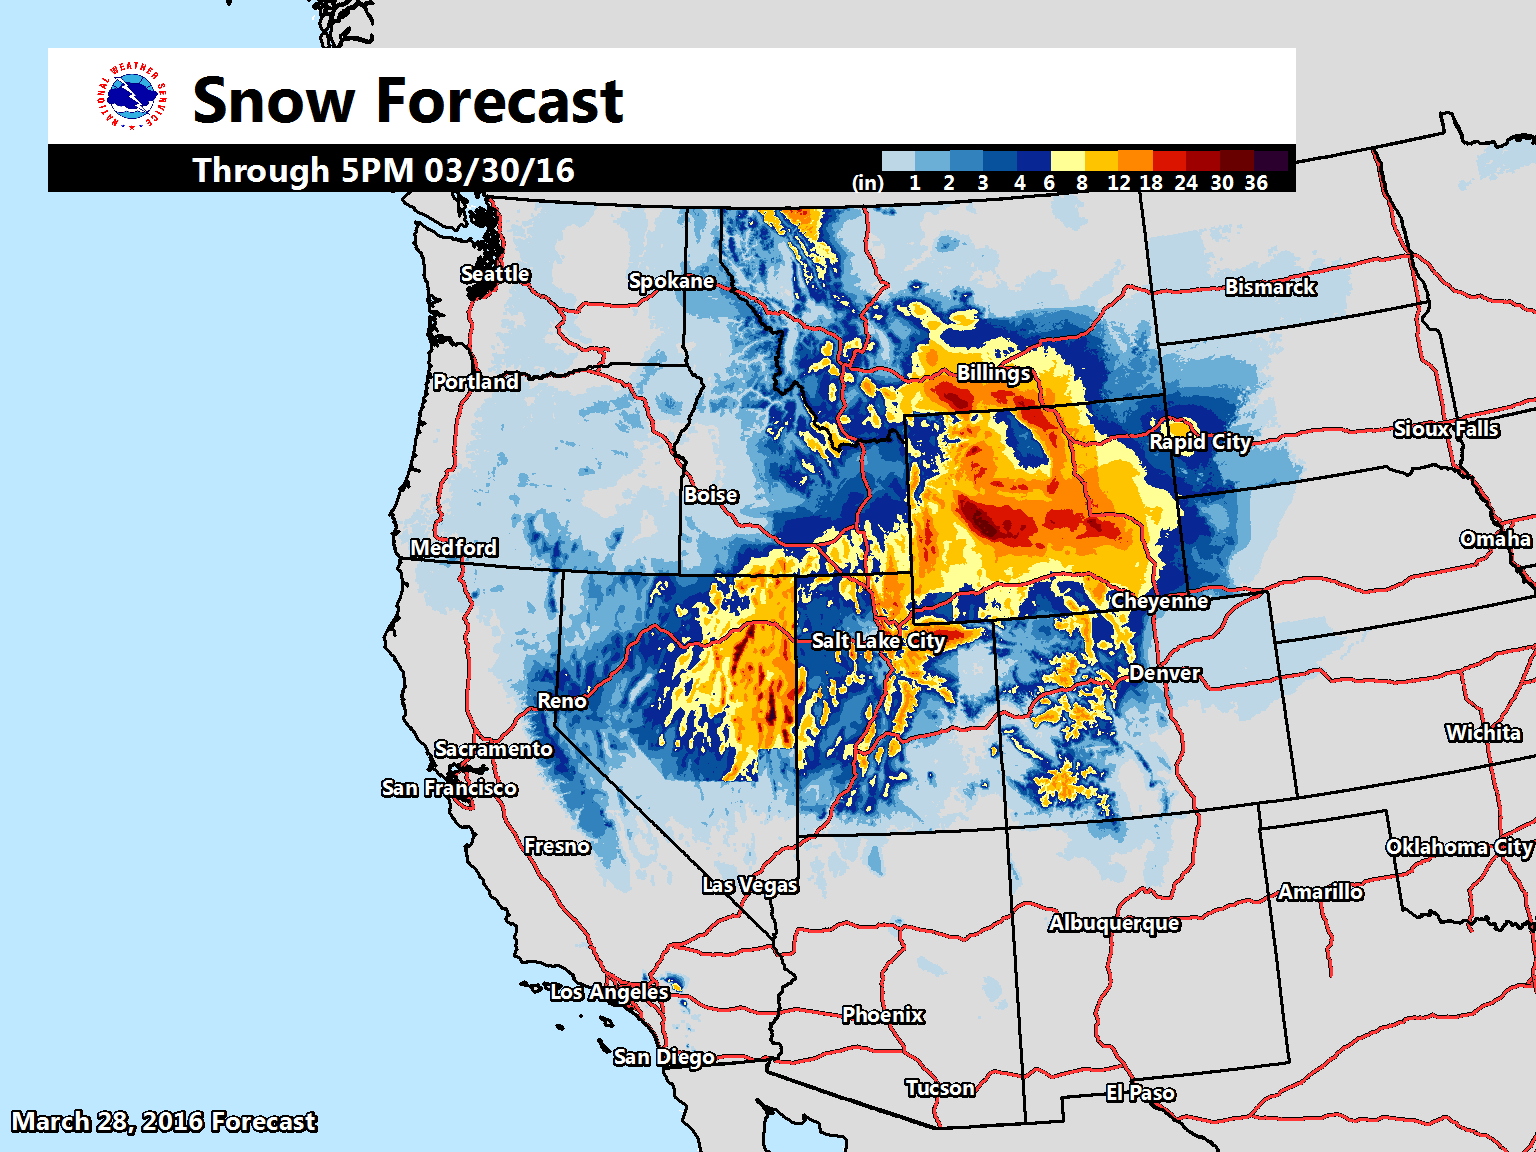 "Potent spring storm will continue to bring snow across the west over the next couple of days. Here is a look at the forecast amounts through Wednesday afternoon." - NOAA, today